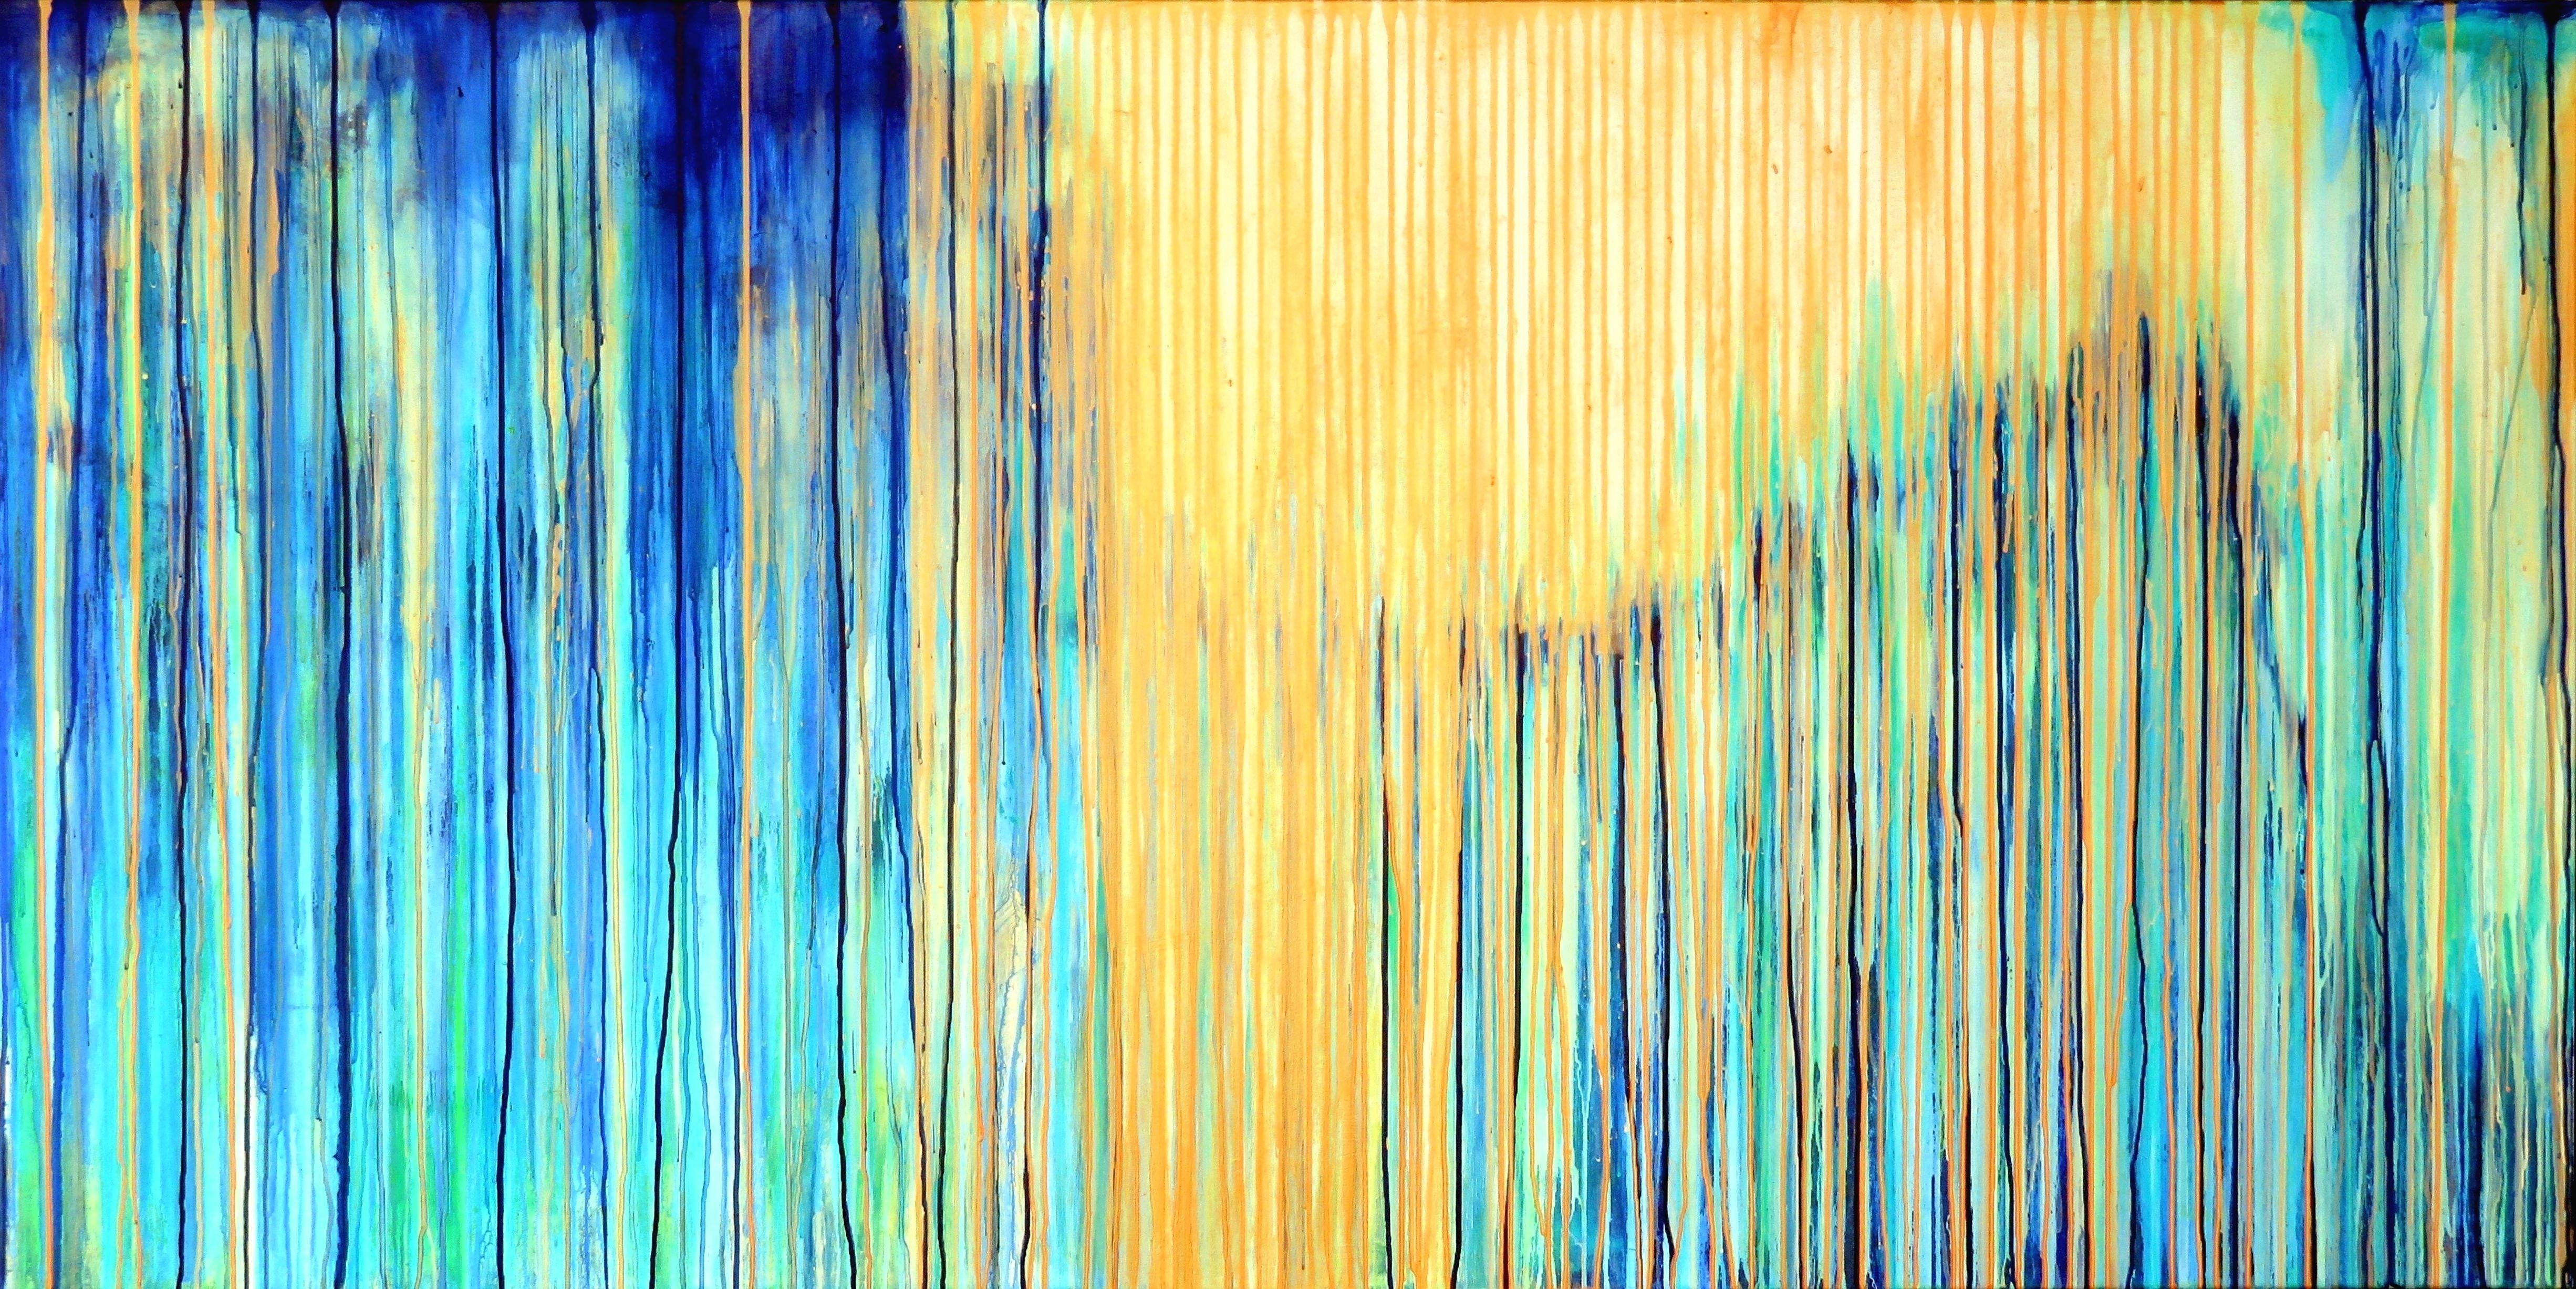 Carla Sá Fernandes Abstract Painting - The Emotional Creation #196, Painting, Acrylic on Canvas